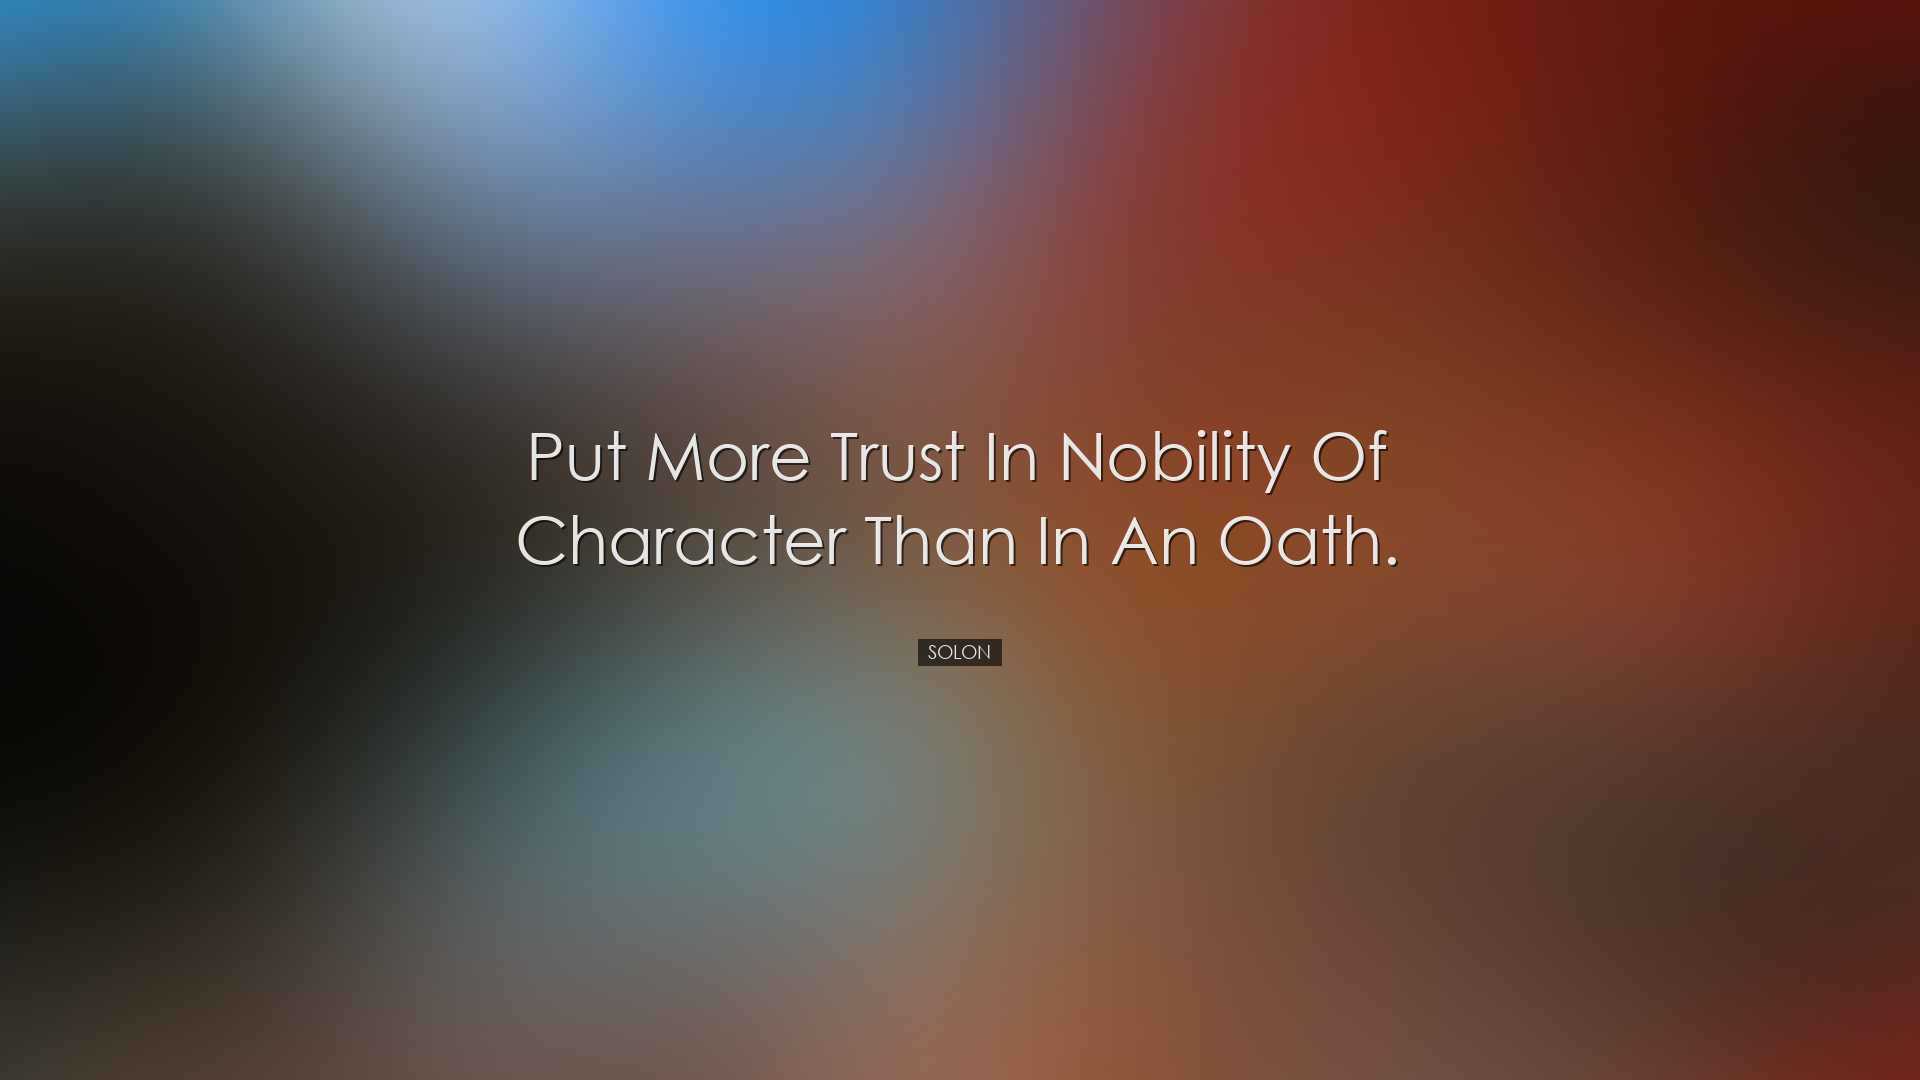 Put more trust in nobility of character than in an oath. - Solon